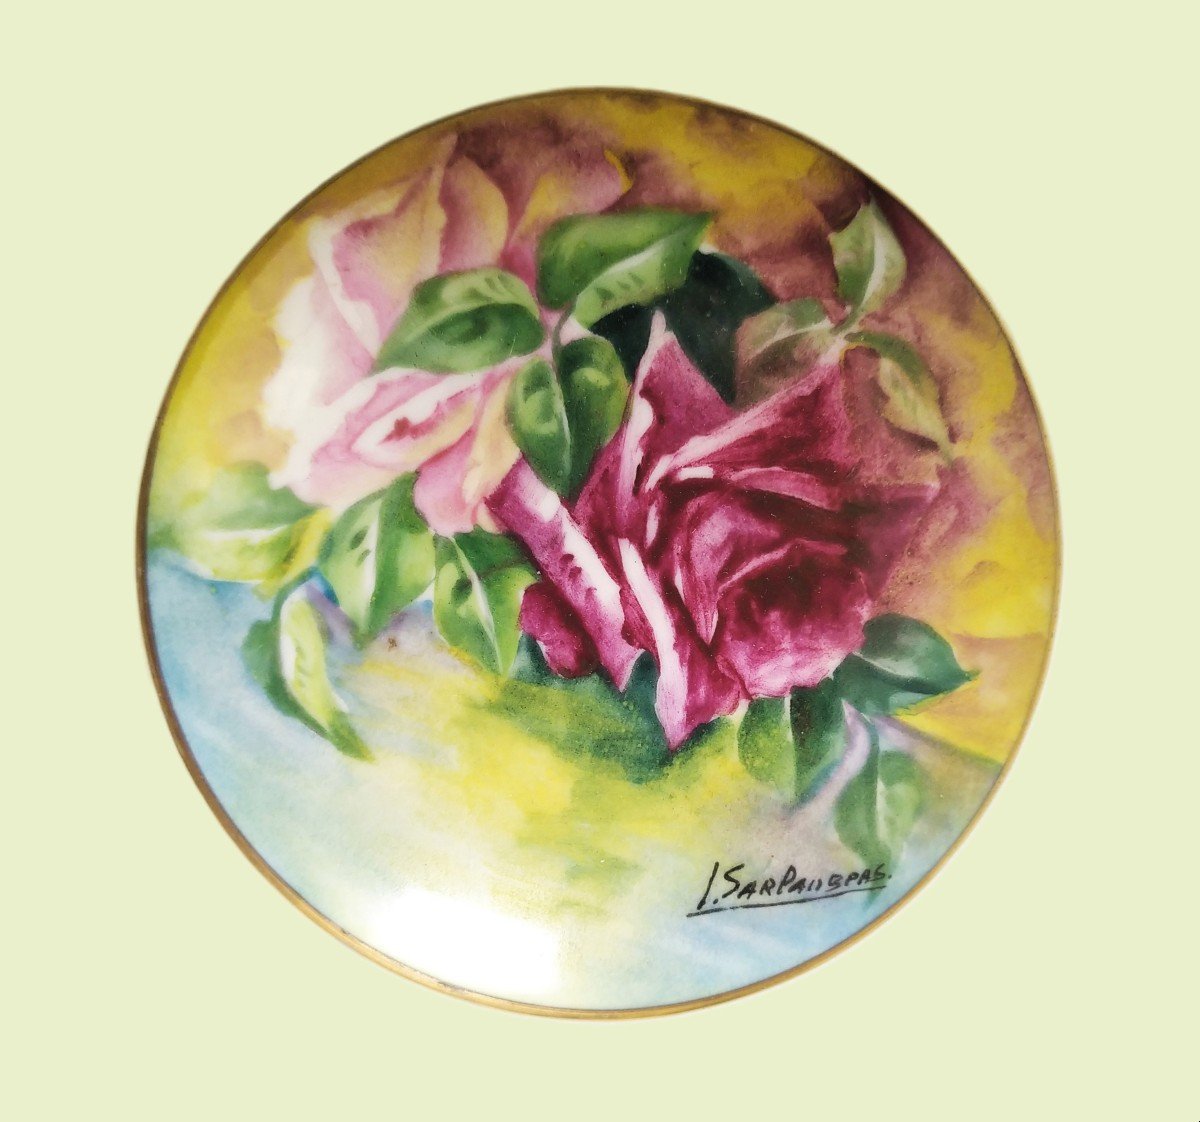 Jewelry Or Candy Box Hand Painted Limoges Porcelain Decor Roses Signed By Artist Sarlangeas -photo-3